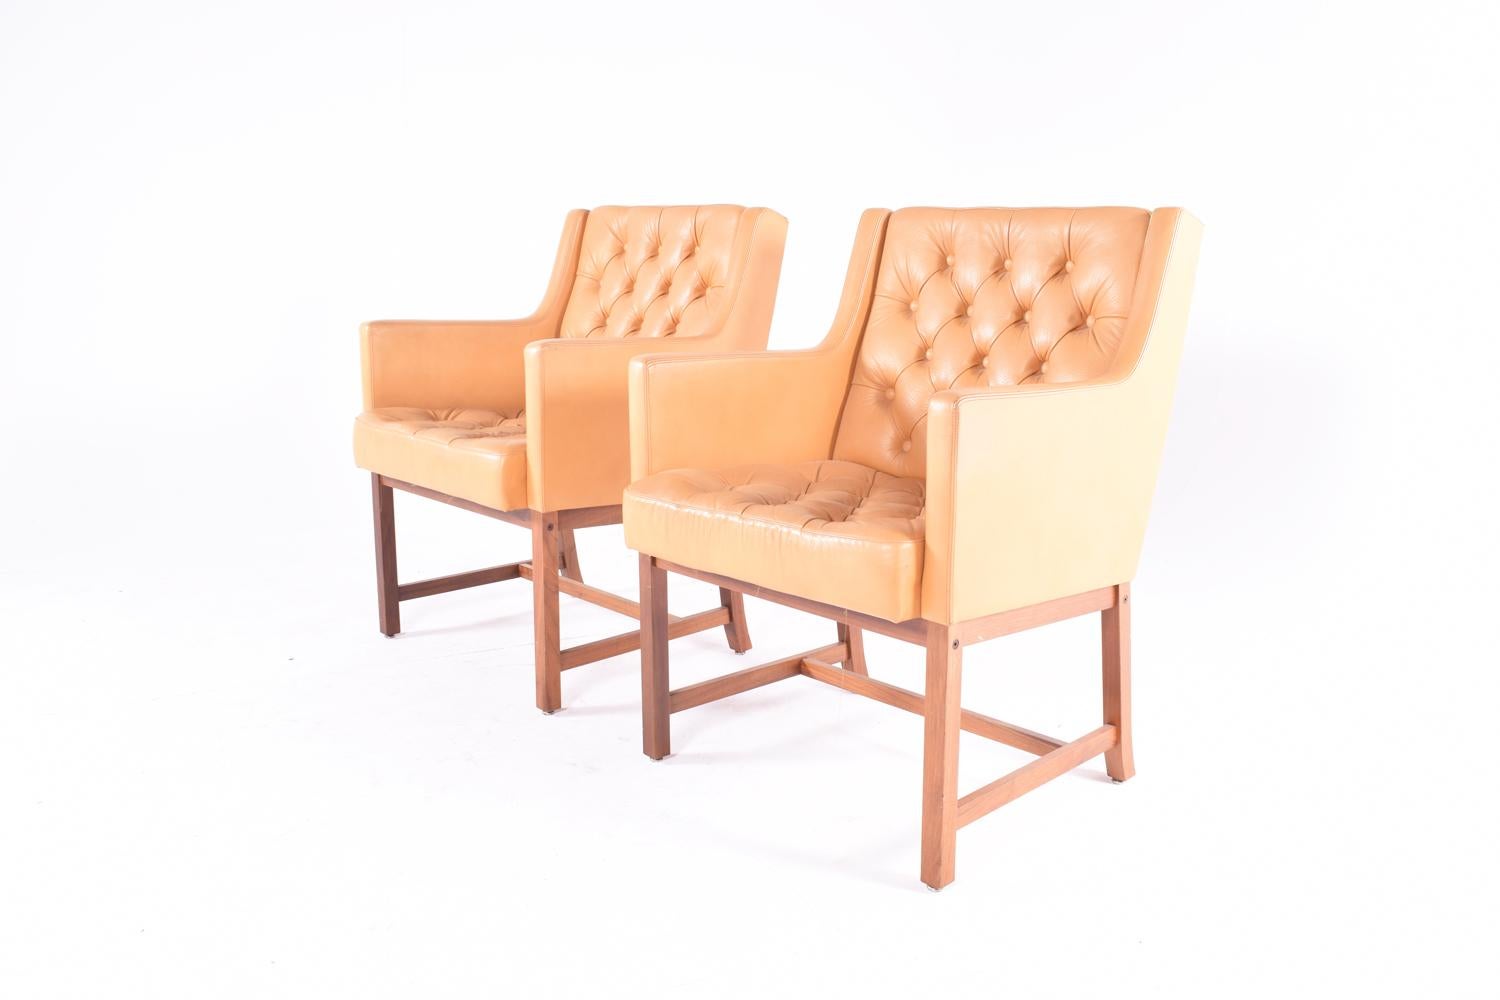 Great example of a pair of camel tufted leather chairs with solid teak legs, designed by Karl Erik Ekselius for JOC Mobler, Sweden. Original leather in very good condition with no tears or damage, and shows a minor amount of nice patina.